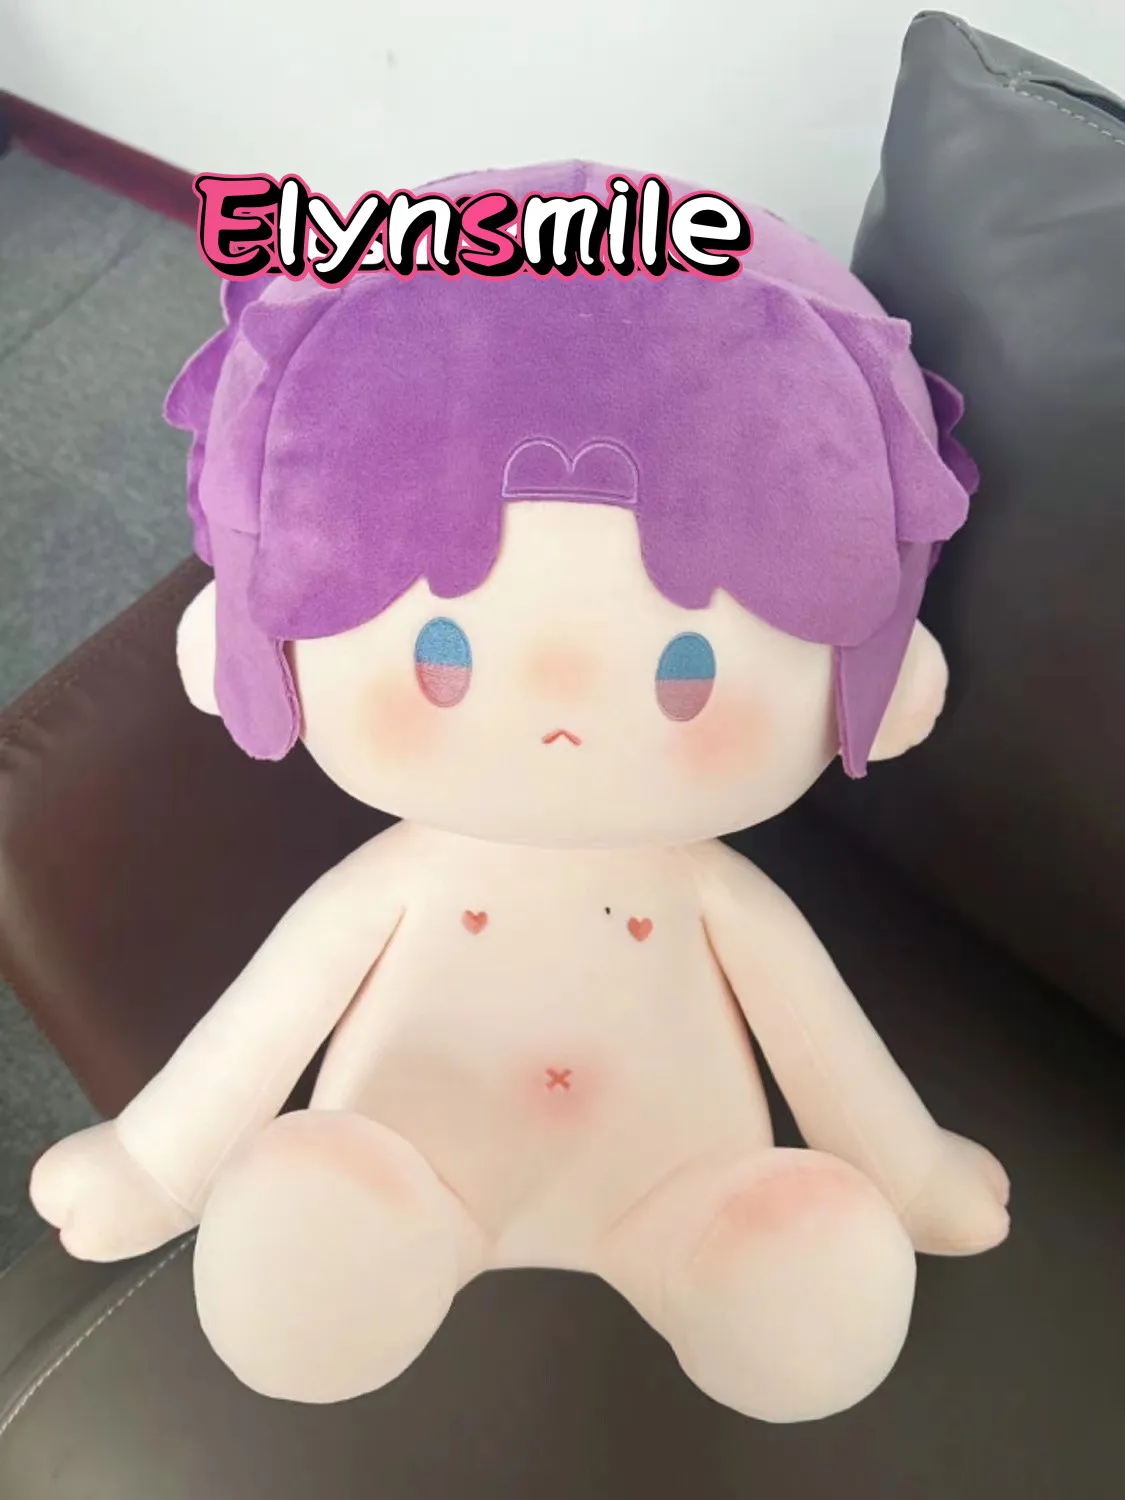 in-stock-game-love-and-deepspace-zayne-ralayo-xavier-40cm-cute-plush-doll-clothes-soft-pillow-anime-figure-toy-for-kids-gifts